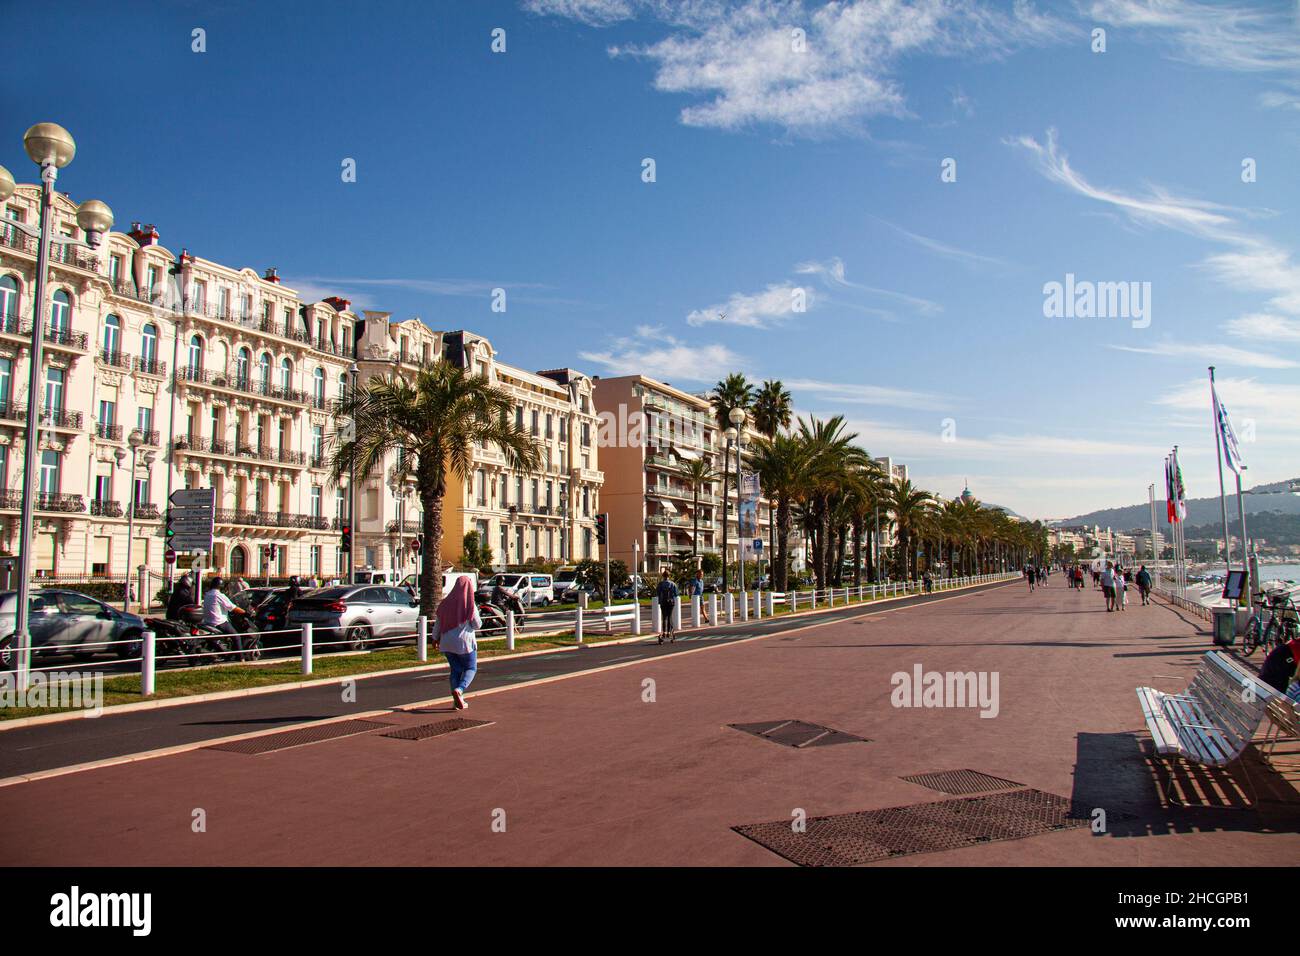 Promenade des Anglais in Nice, French Riviera, with people strolling. Nice France - September 29, 2021. Stock Photo